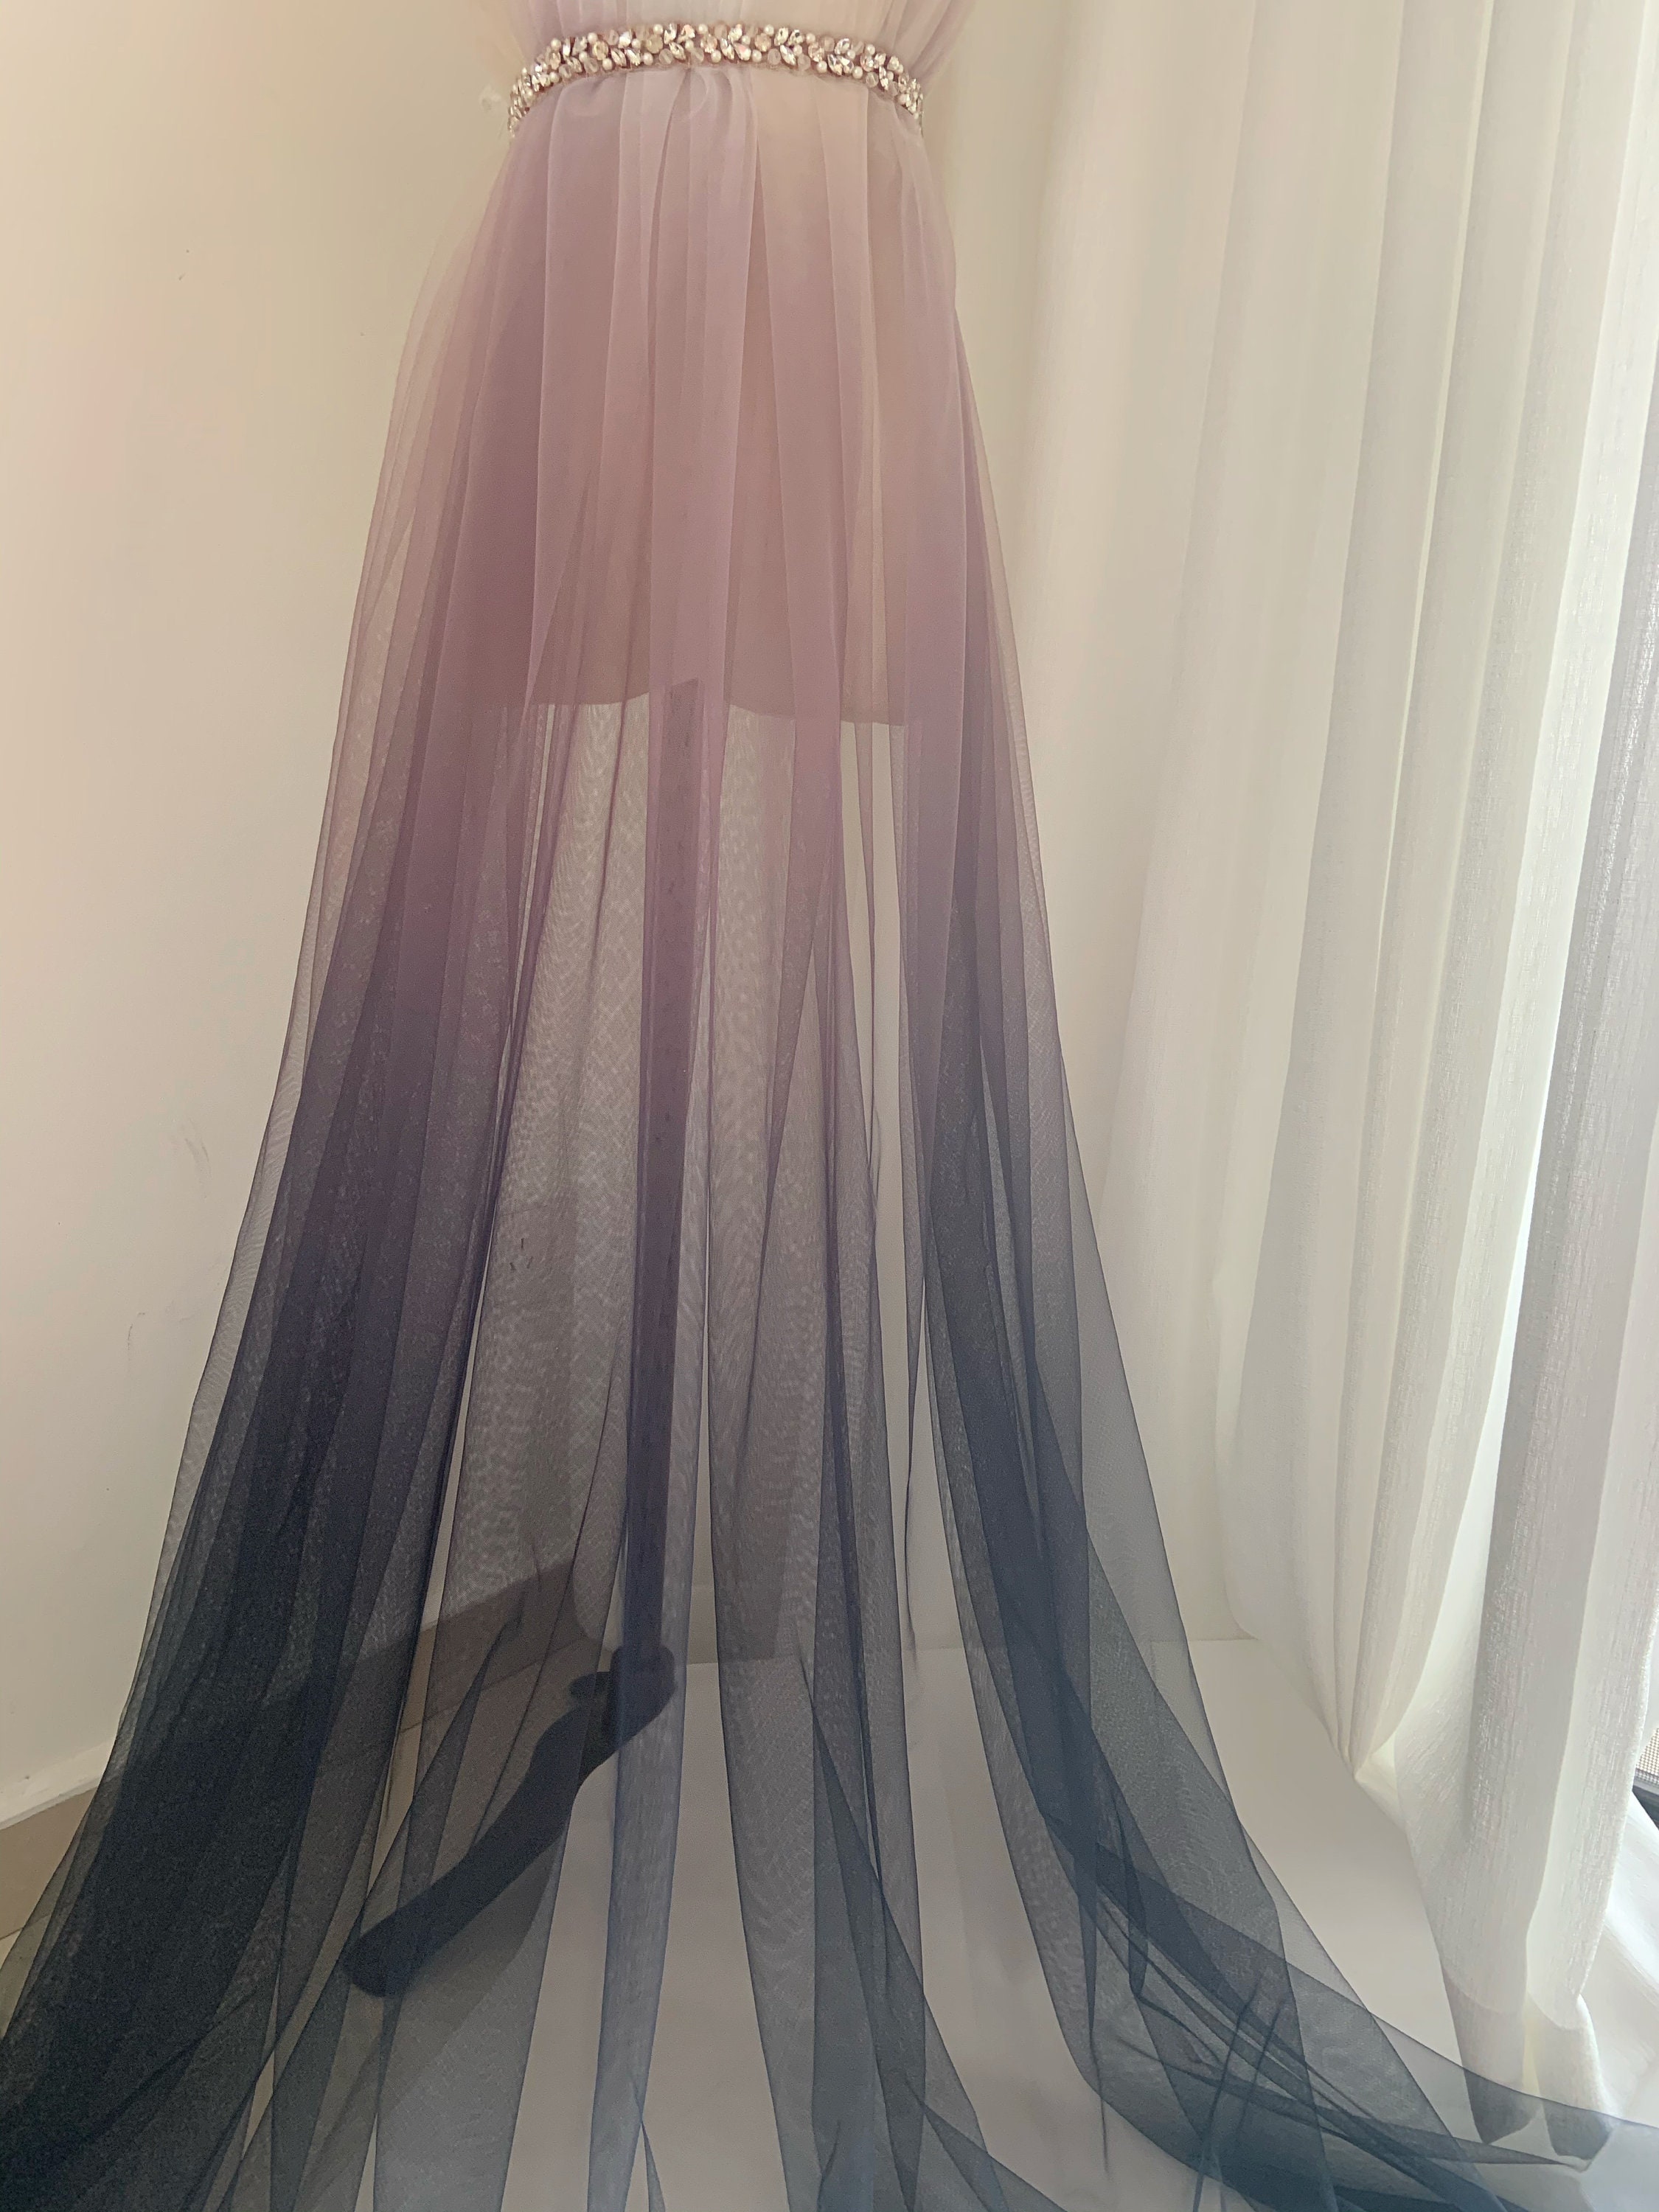 Black Mauve White Dip Dye Style Tulle Fabric With Ombré Color | Etsy